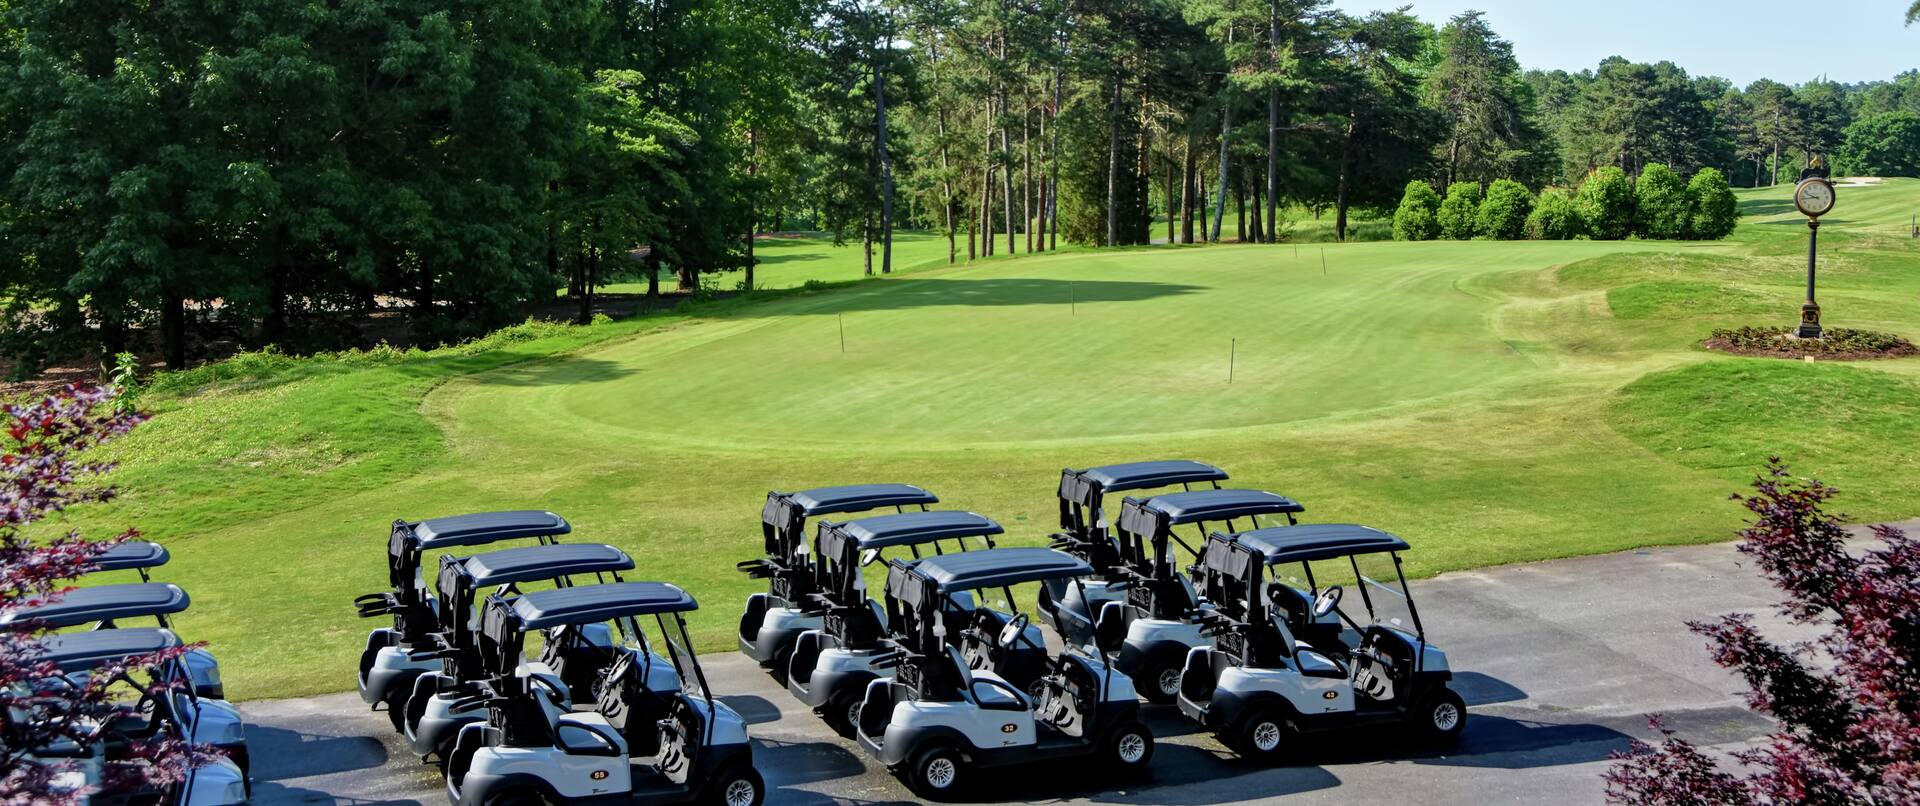 Golf Carts Parked at Golf Course